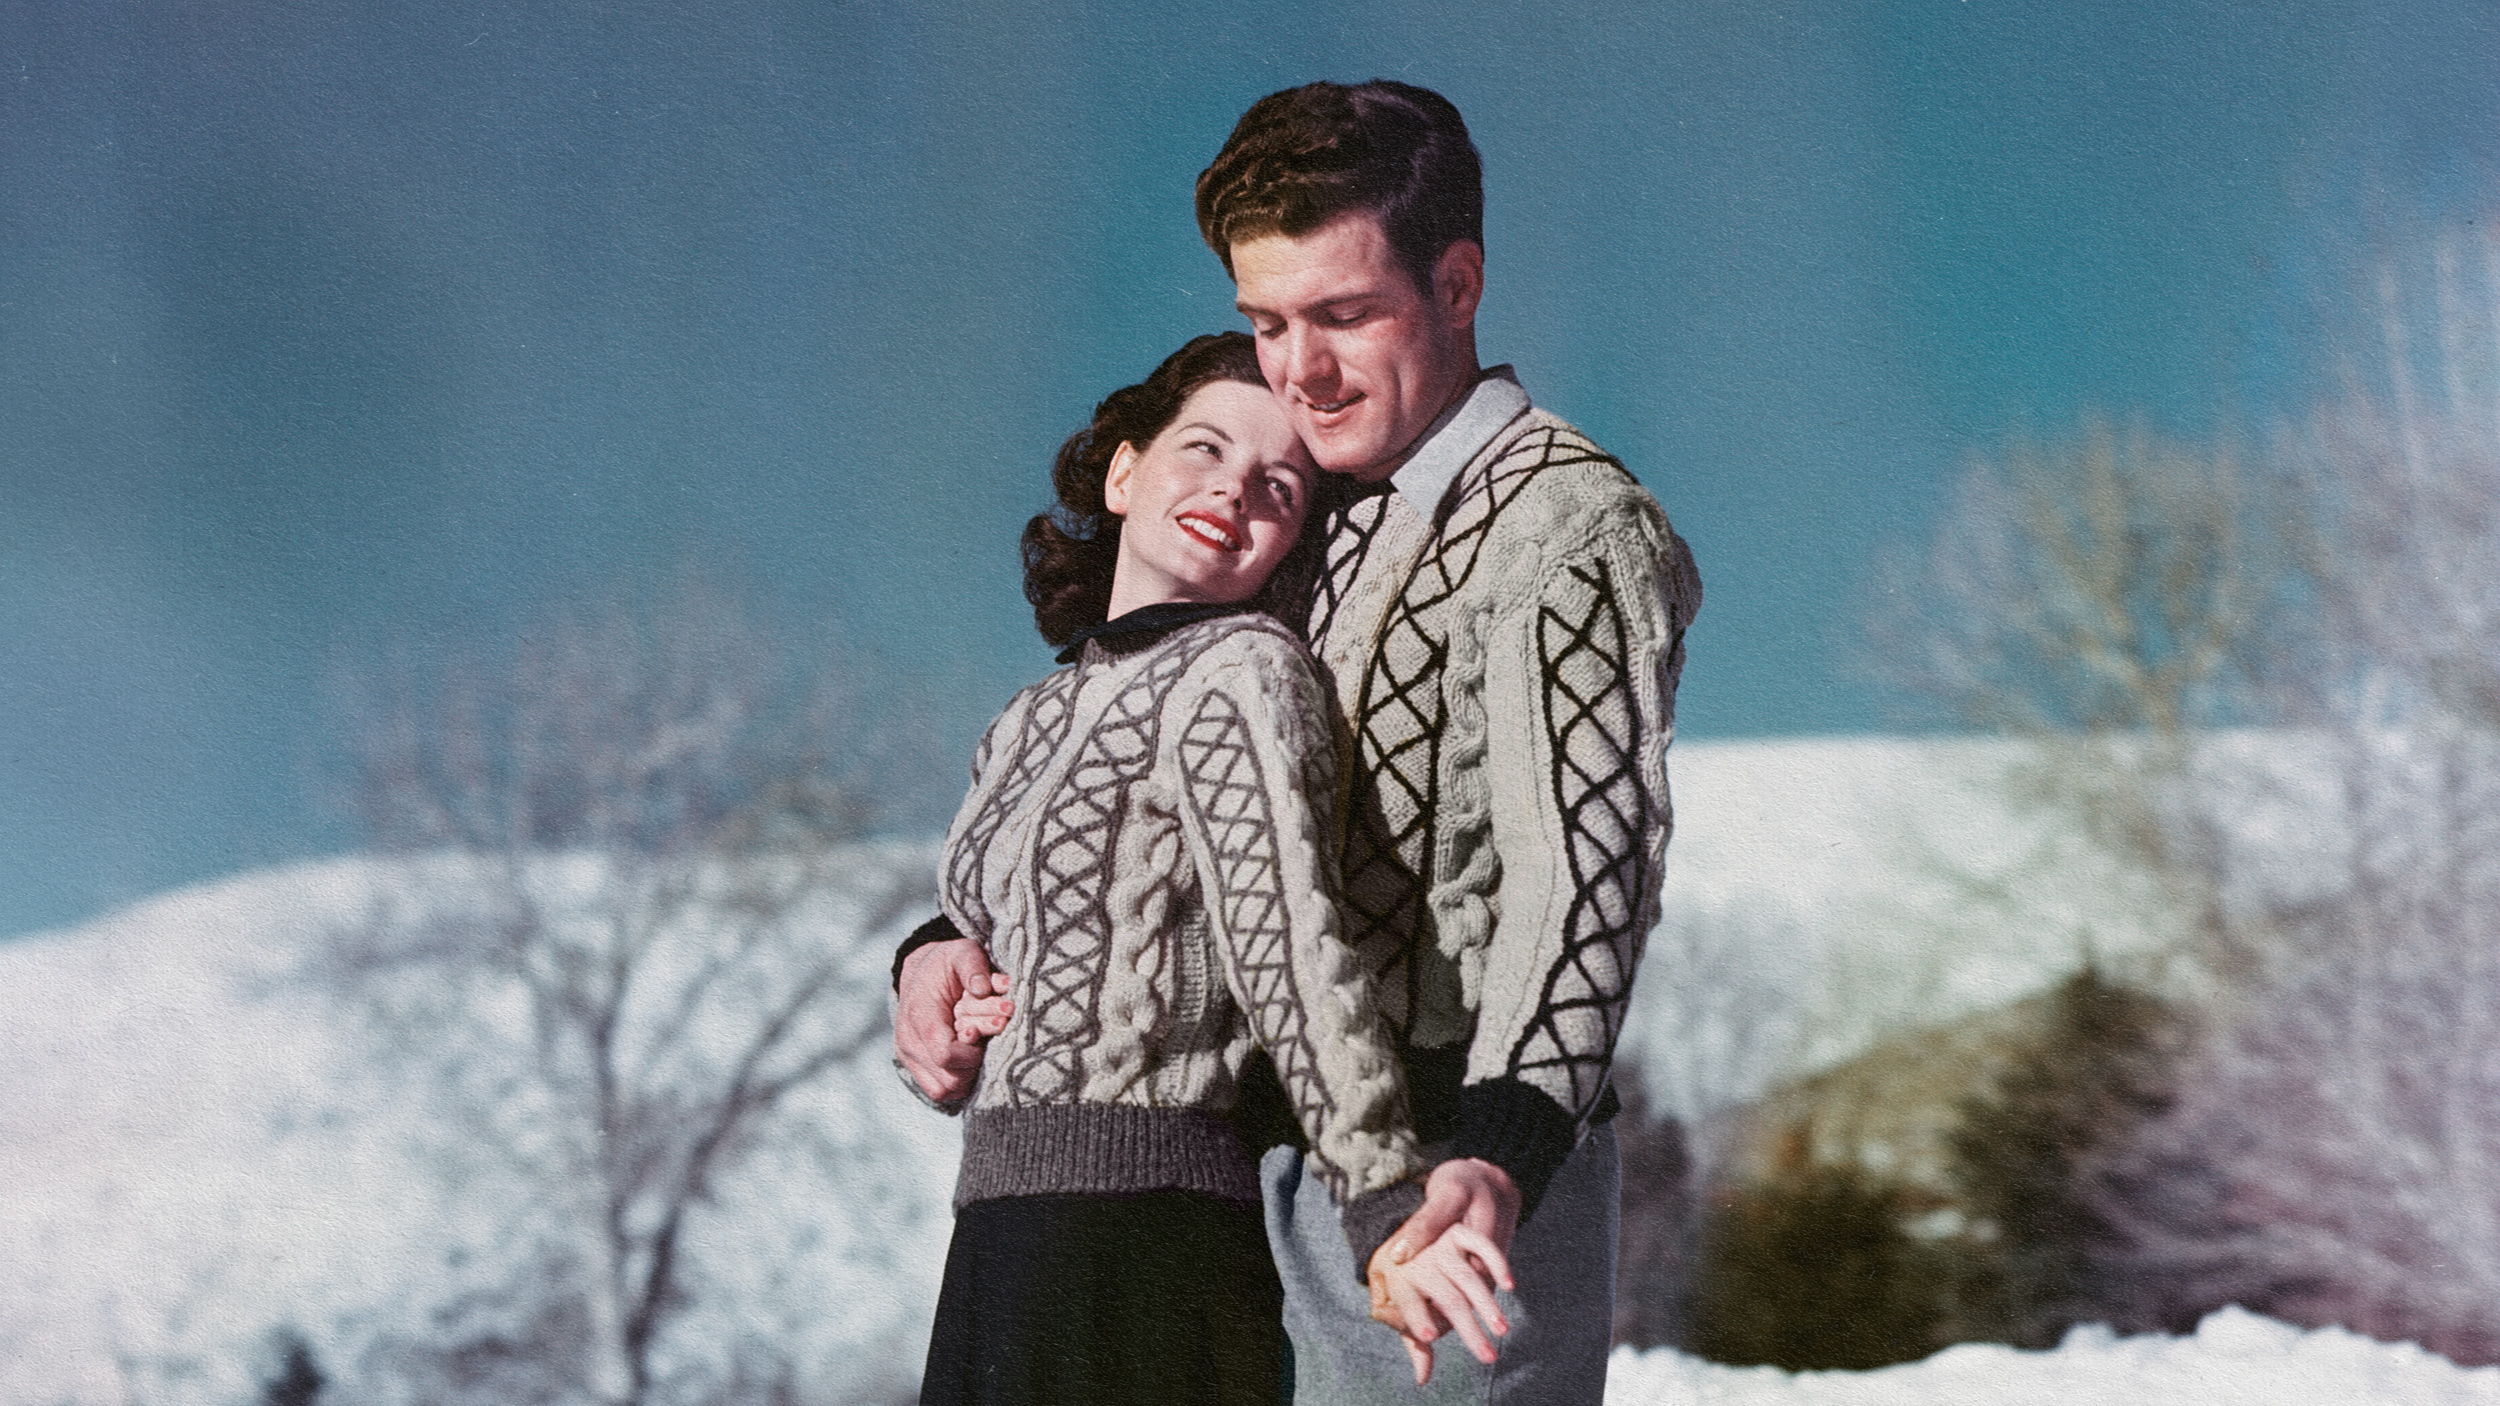 A man and woman wearing sweaters standing in the snow, showcasing how opposites attract.